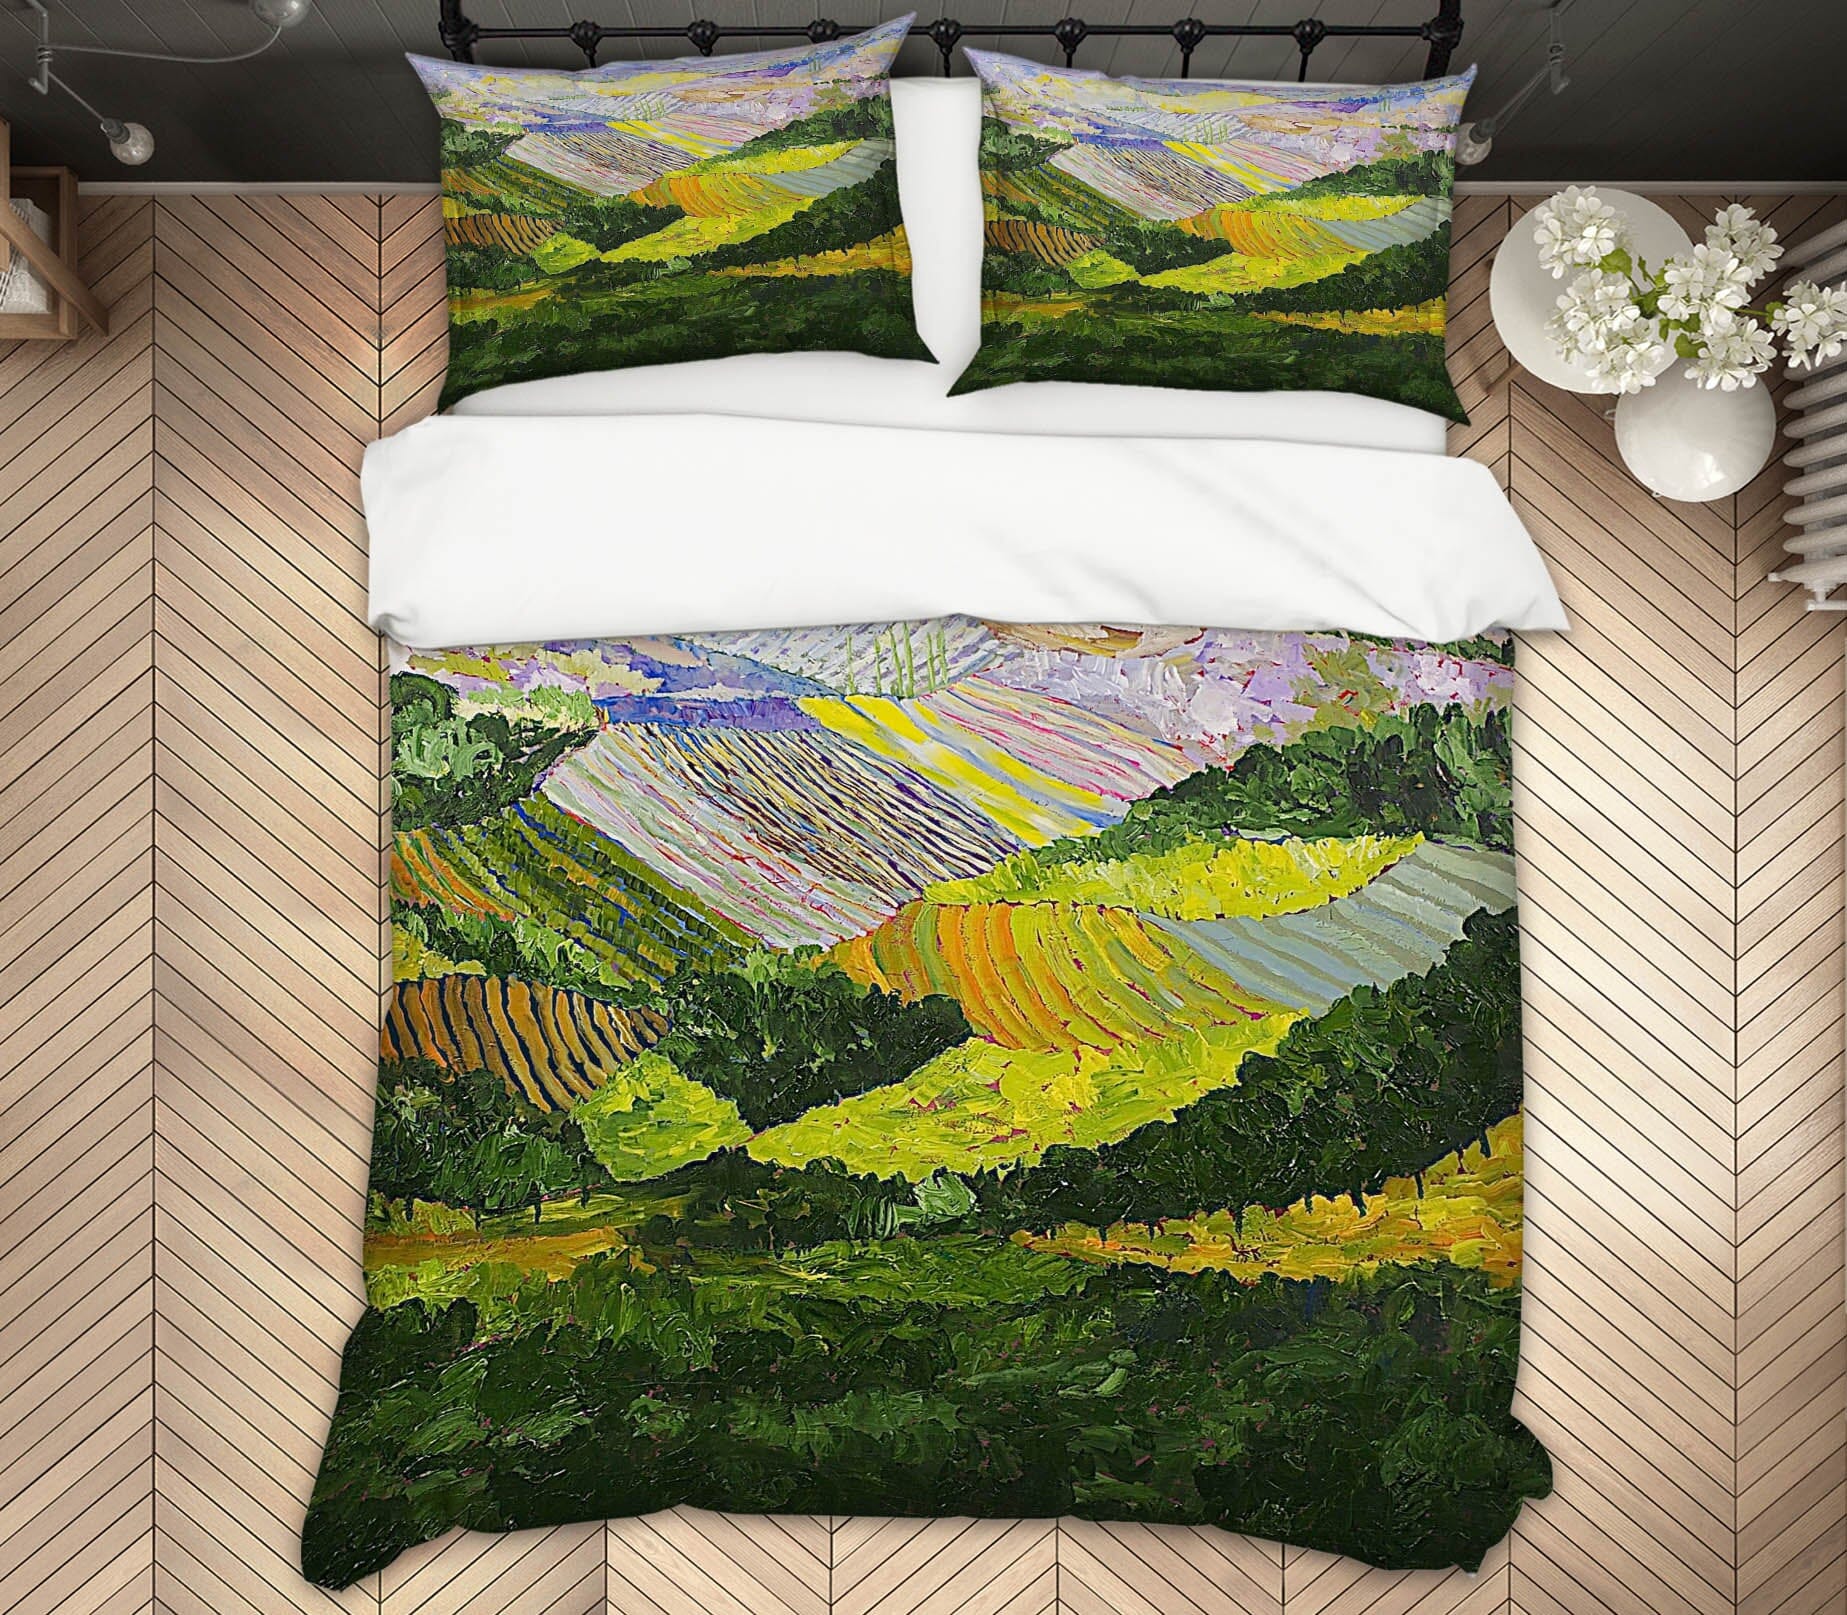 3D Forest And Harvest 2106 Allan P. Friedlander Bedding Bed Pillowcases Quilt Quiet Covers AJ Creativity Home 